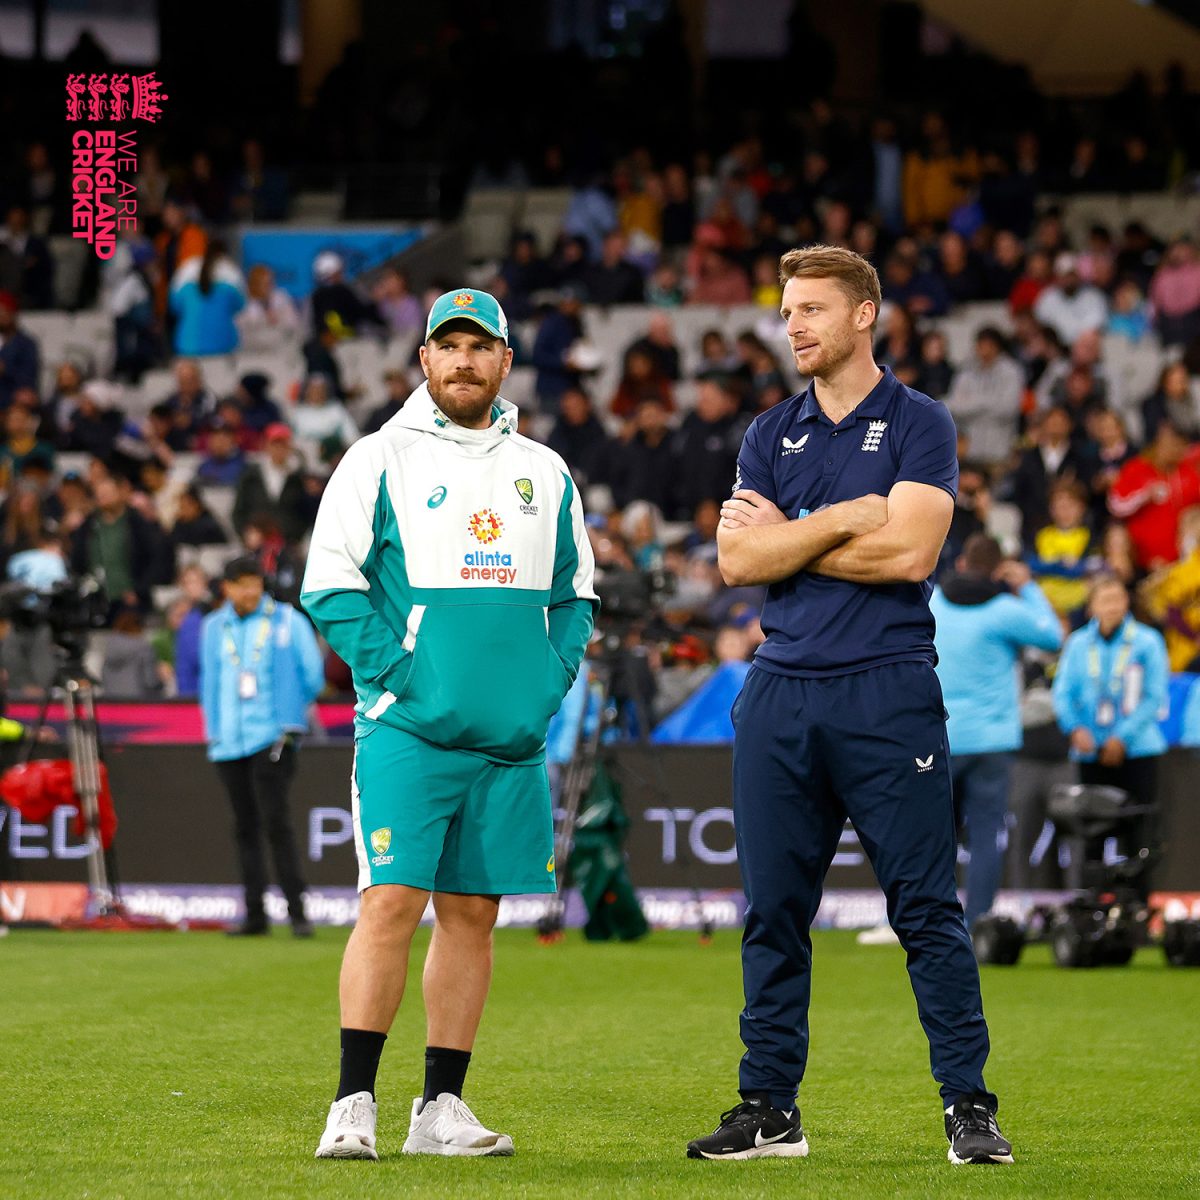 Rain completely washed out yesterday’s showdown between arch rivals England and
defending champions Australia leaving the teams jostling for semi-final spots.